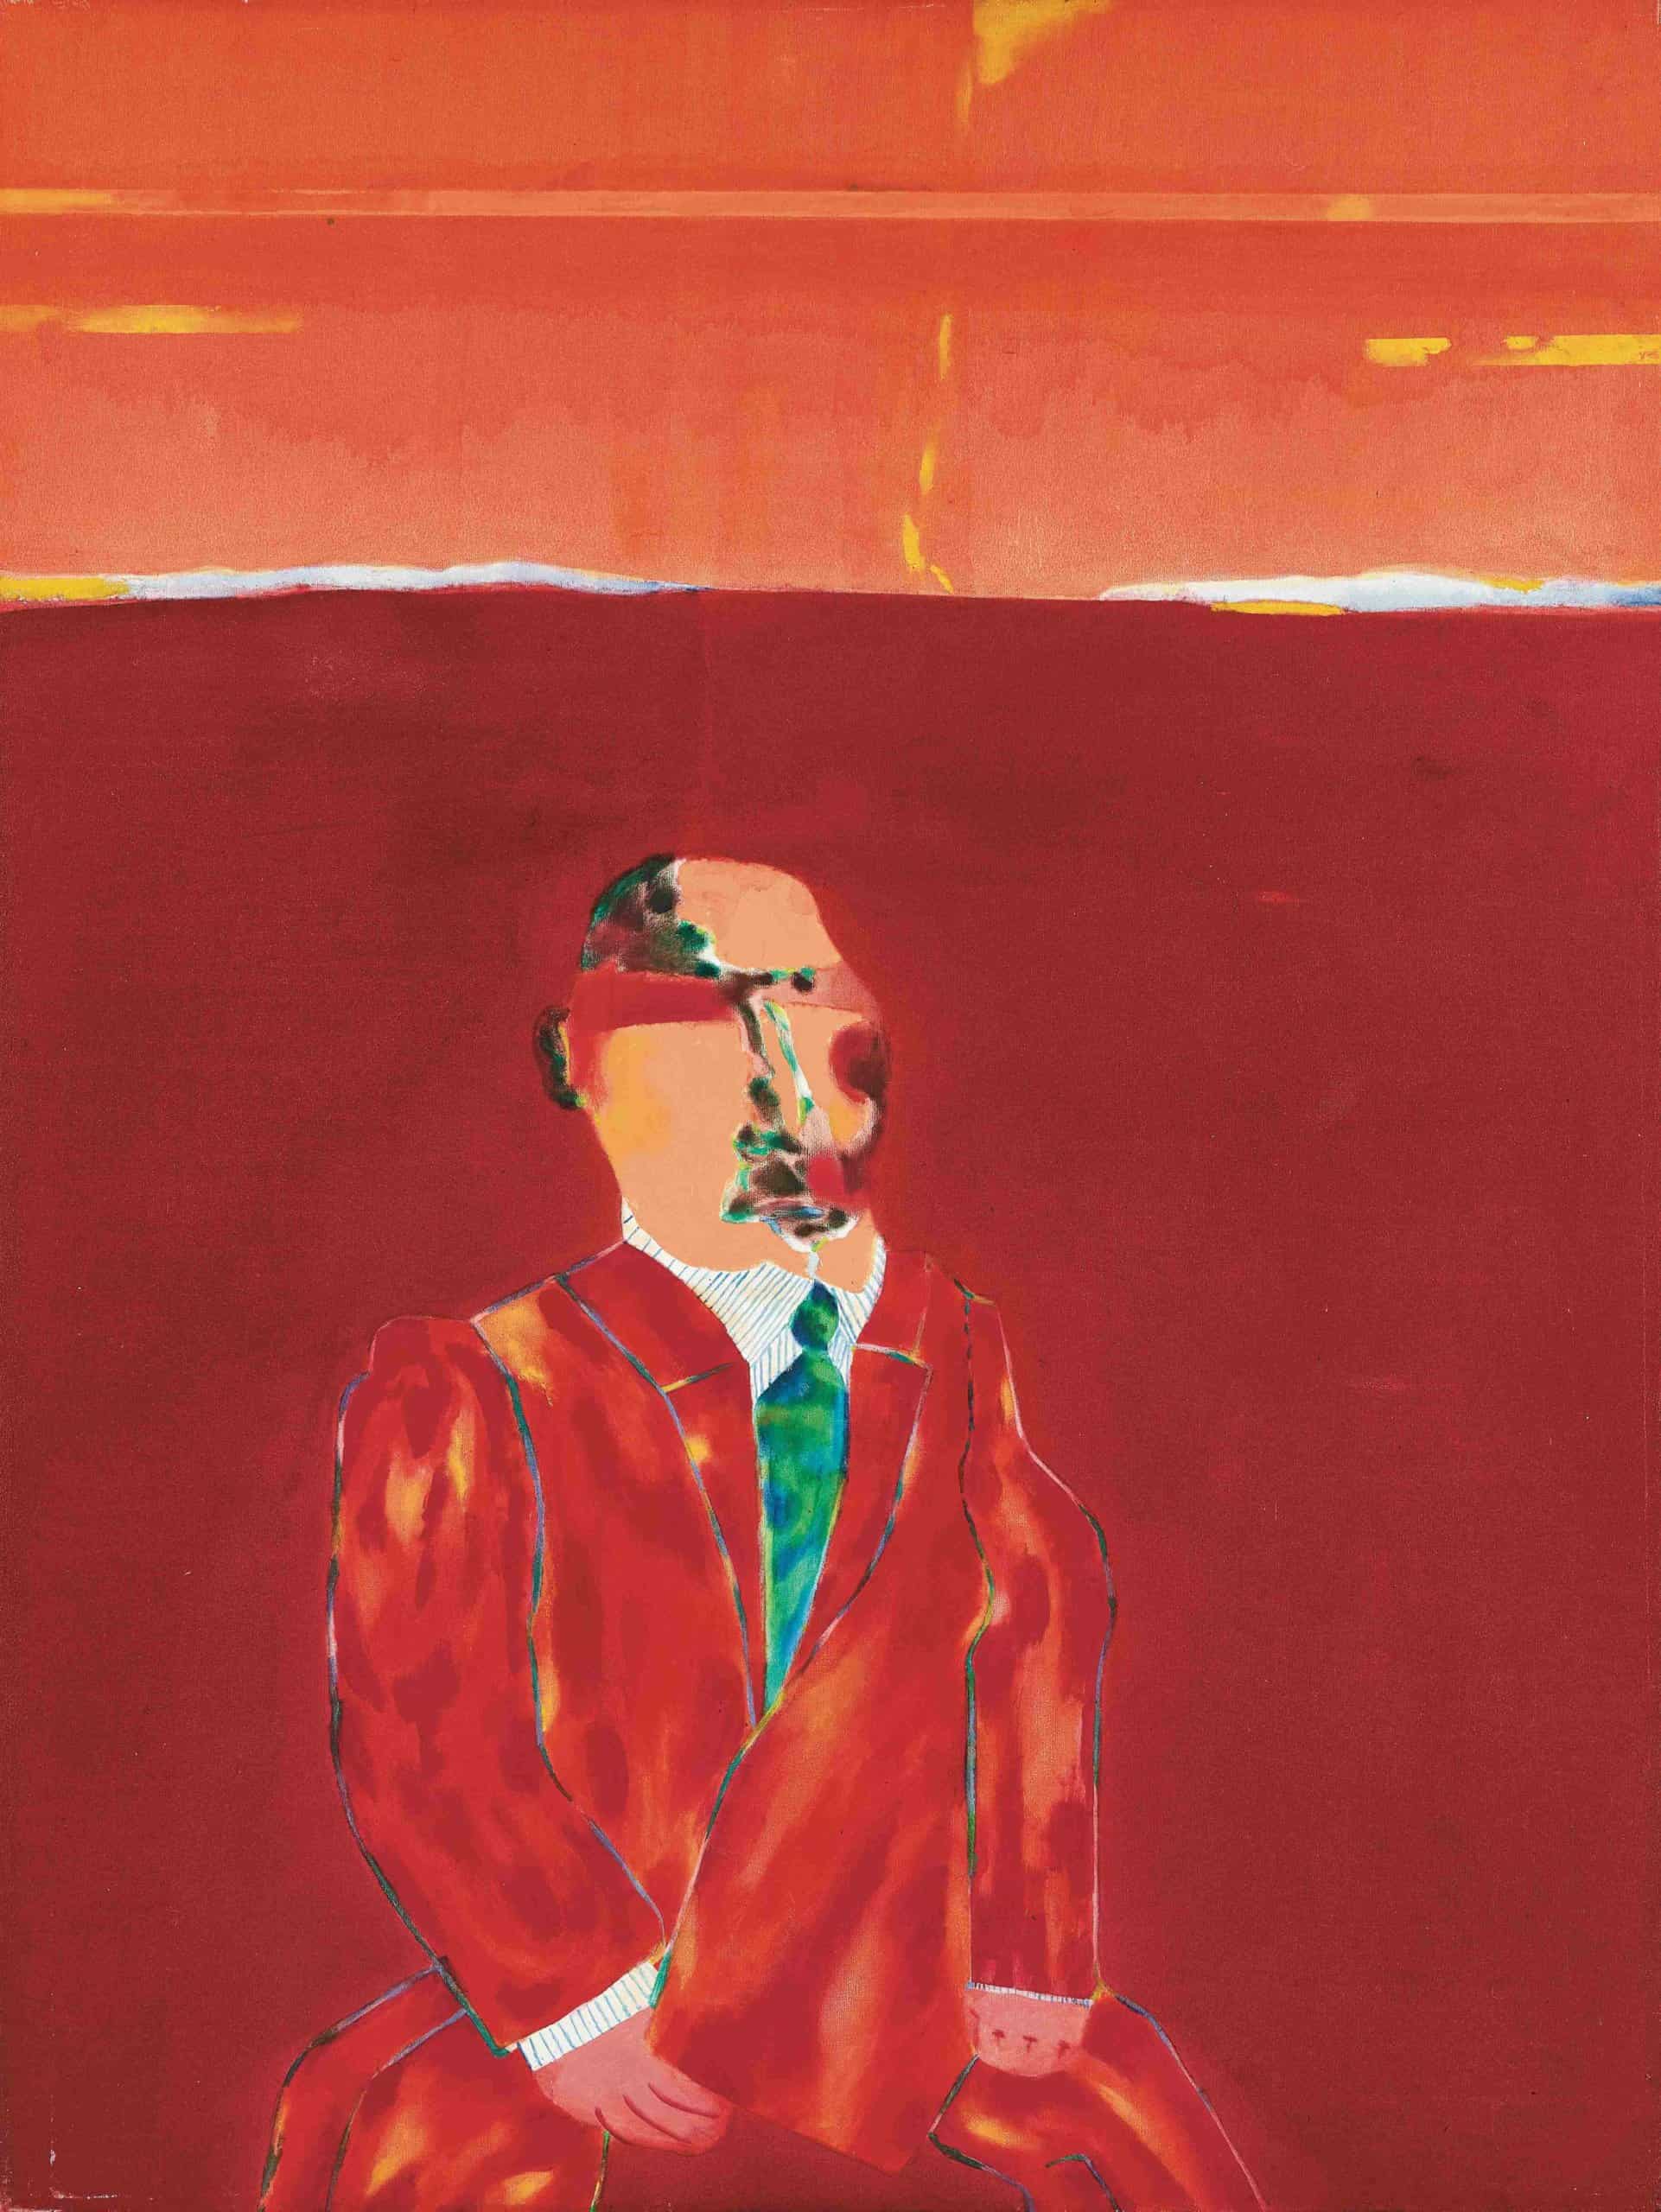 Robert Hodgins, A Suit of Flames and a Brooks Bros' Shirt, 2008/9 | Estimate: R 600 000 - R 900 000